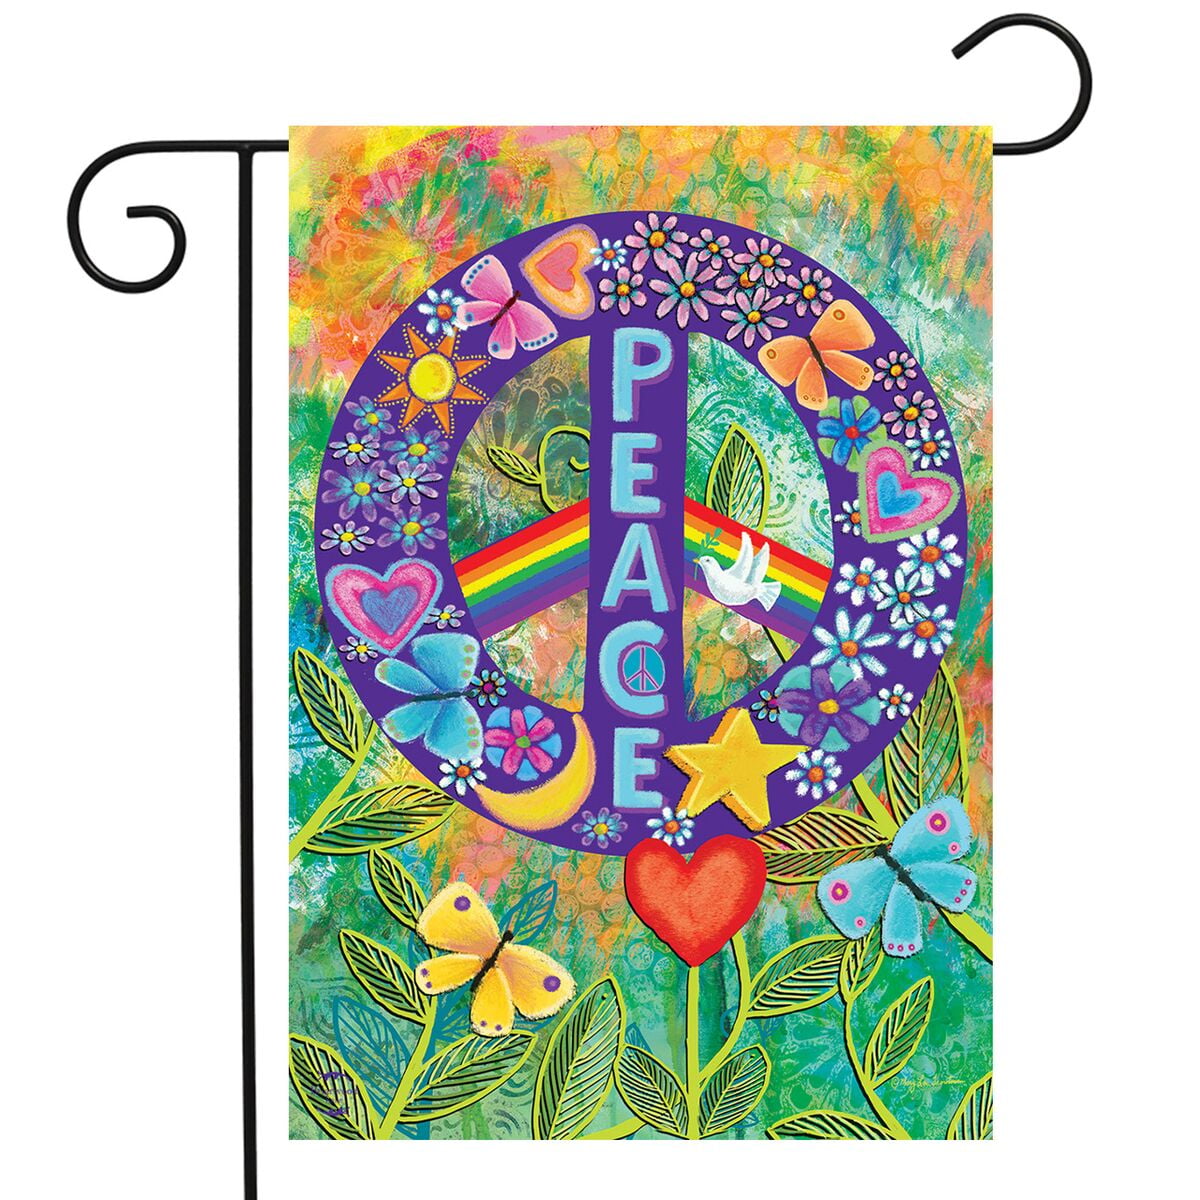 All You Need Is Love Inspirational Garden Flag Everyday 12.5"x18" Briarwood Lane 